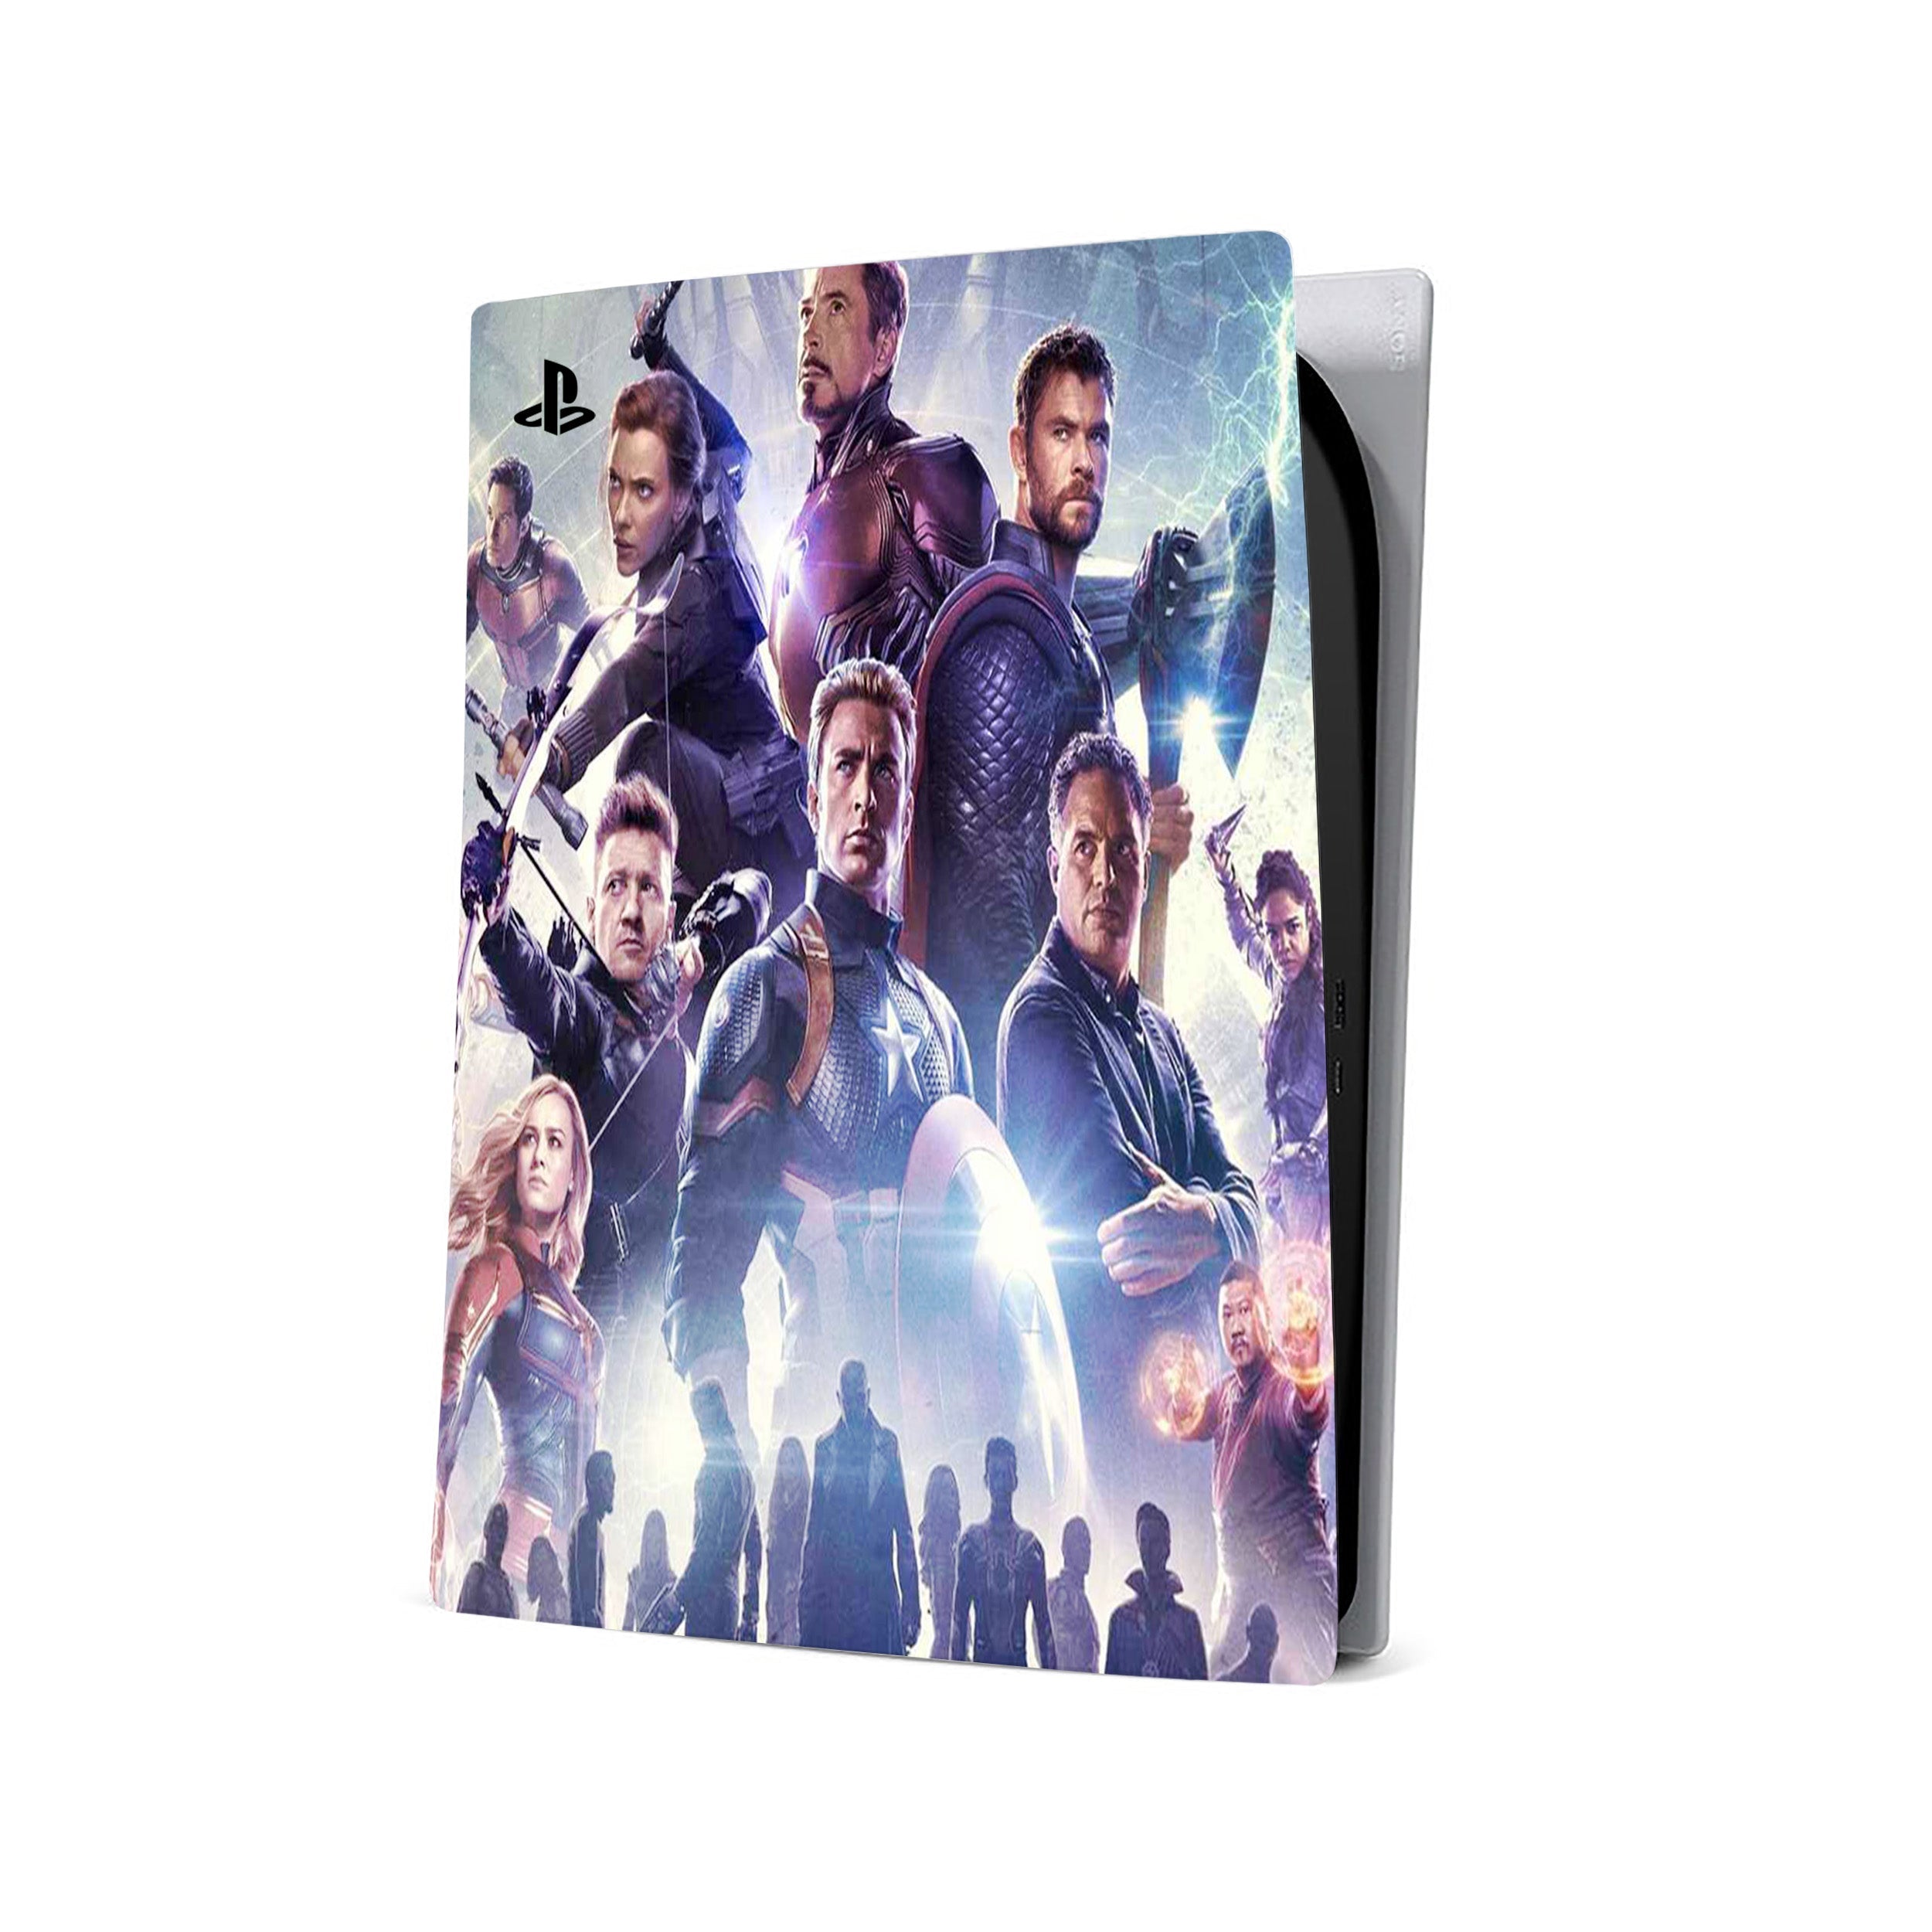 A video game skin featuring a Marvel Cinematic Universe design for the PS5.